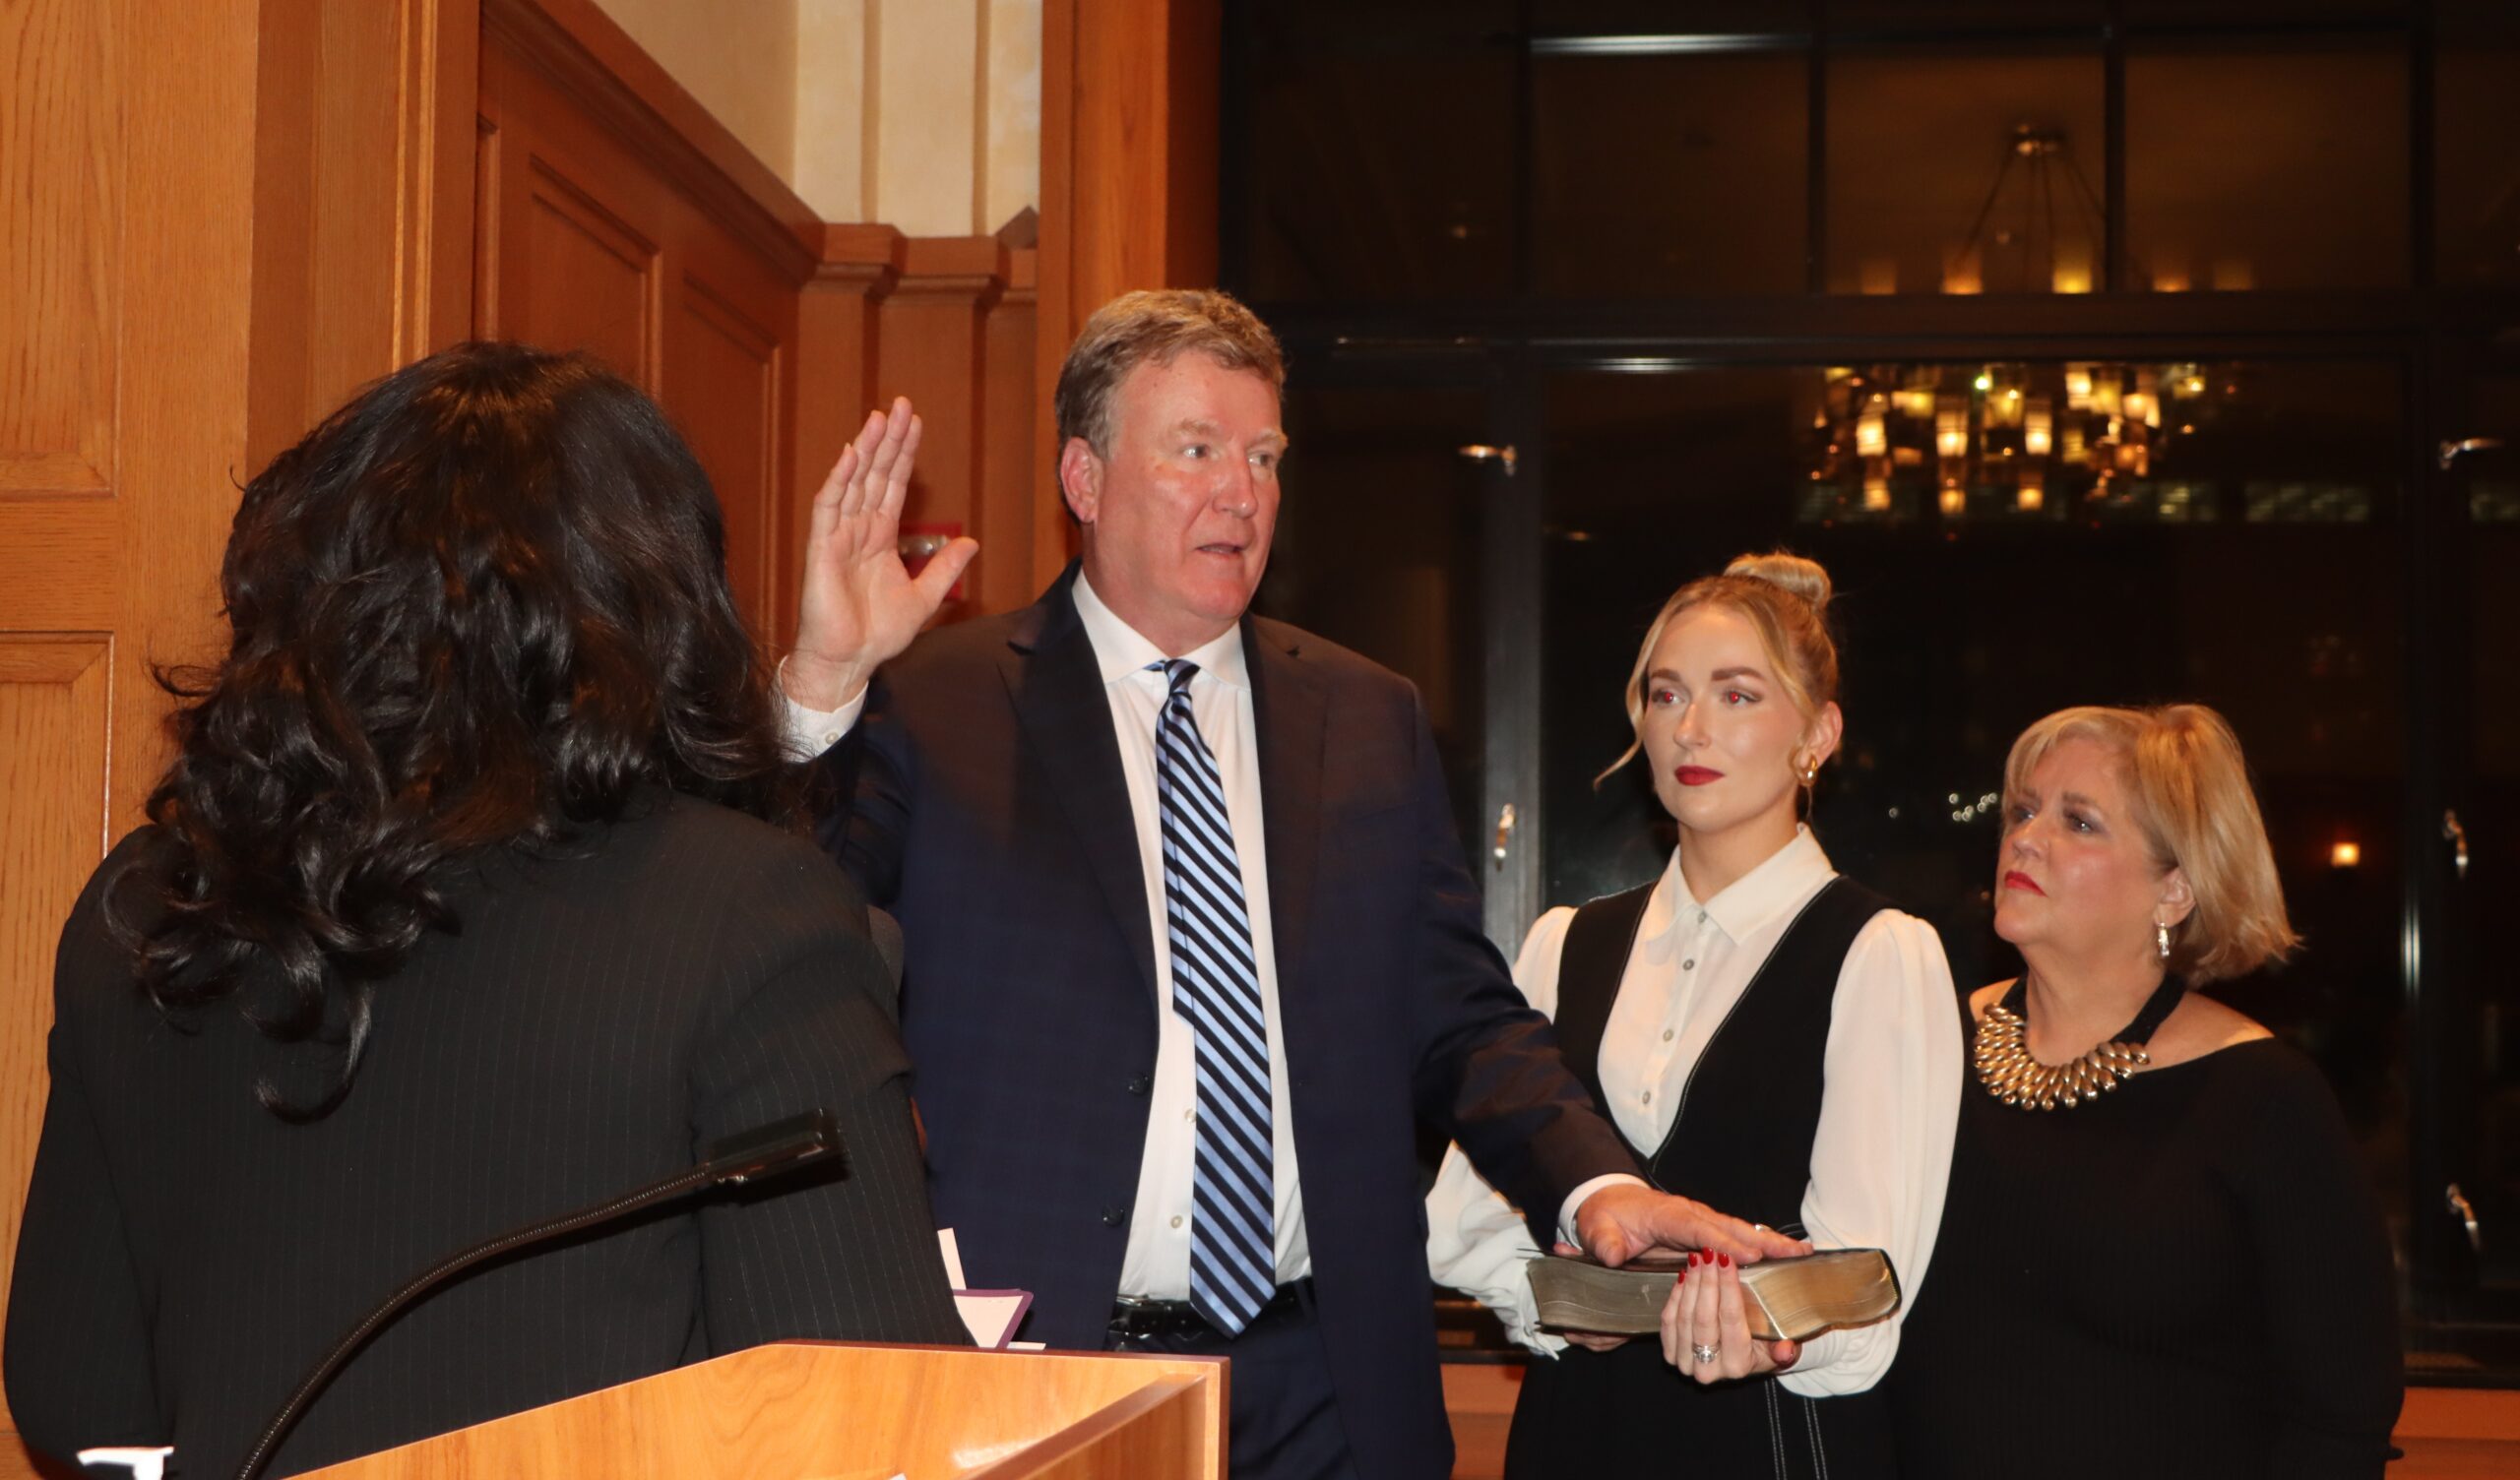 Hon. Bernard Graham has his family at his side as he is officially sworn in as the elected Surrogate Court justice in Kings County by the NYC Corporation Counsel Sylvia Hinds-Radix (left).Photos: Mario Belluomo/AP